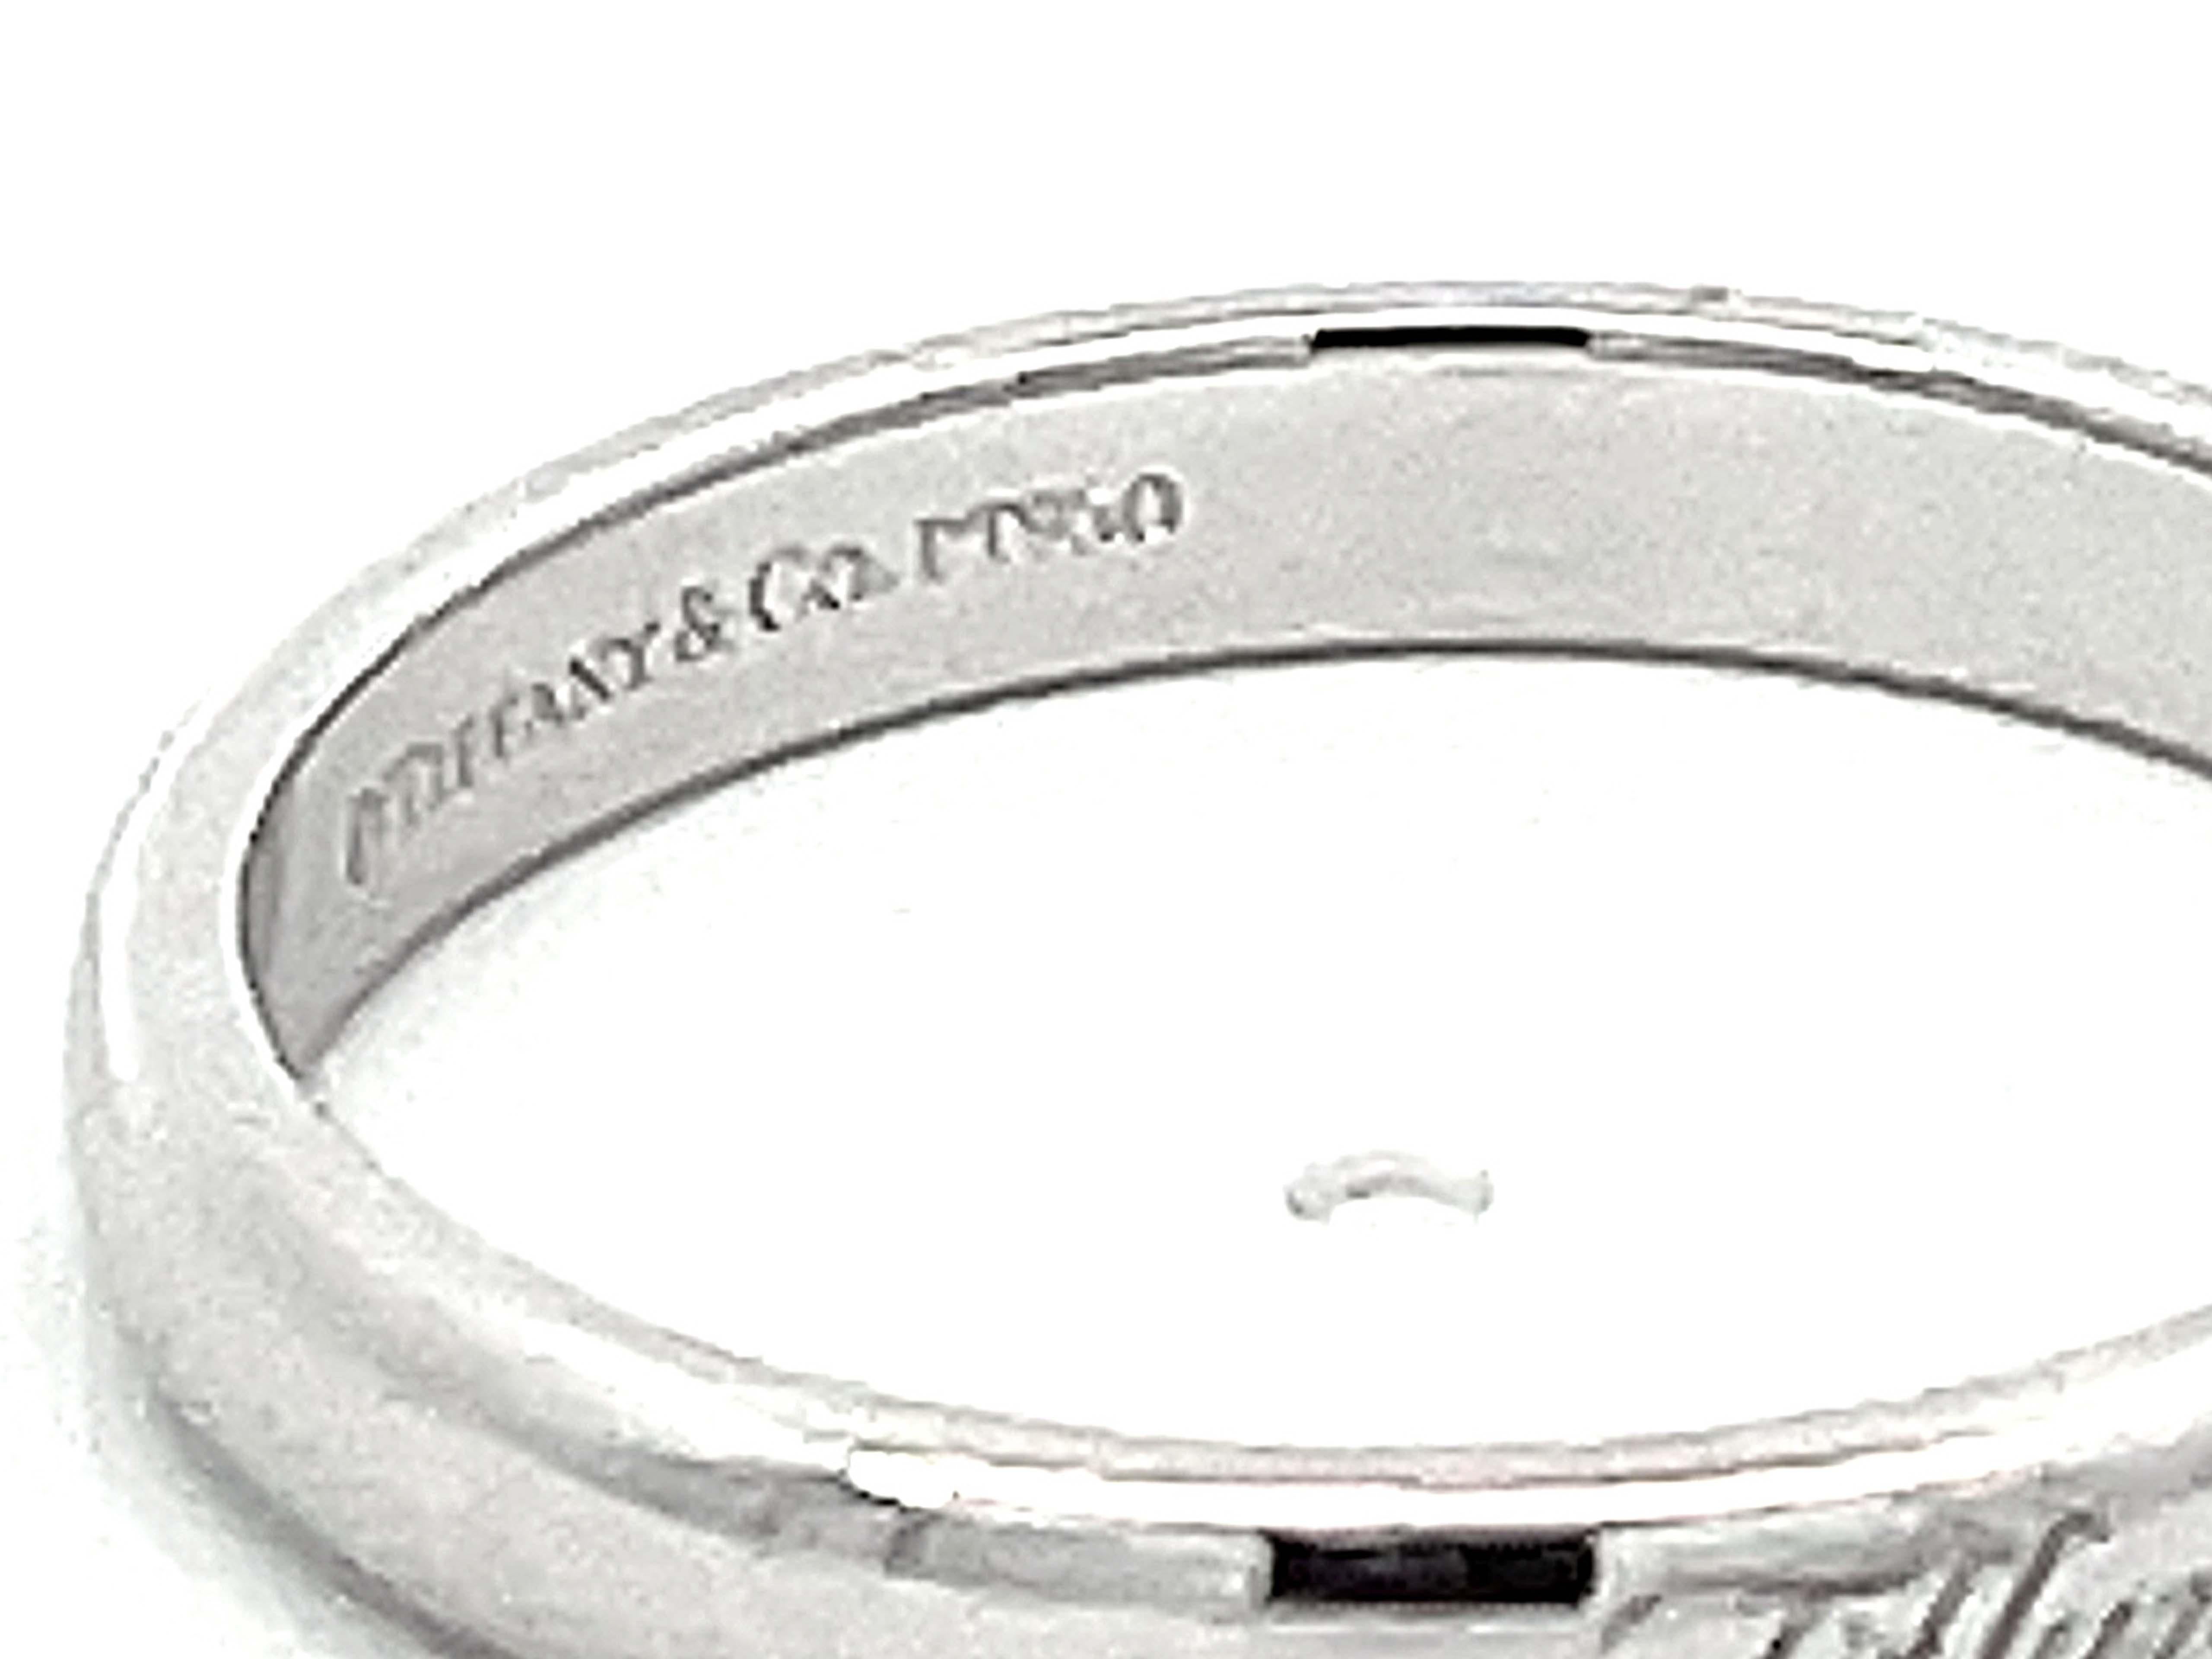 Vintage Tiffany & Co. Wedding Band Ring in Platinum In Excellent Condition For Sale In Honolulu, HI